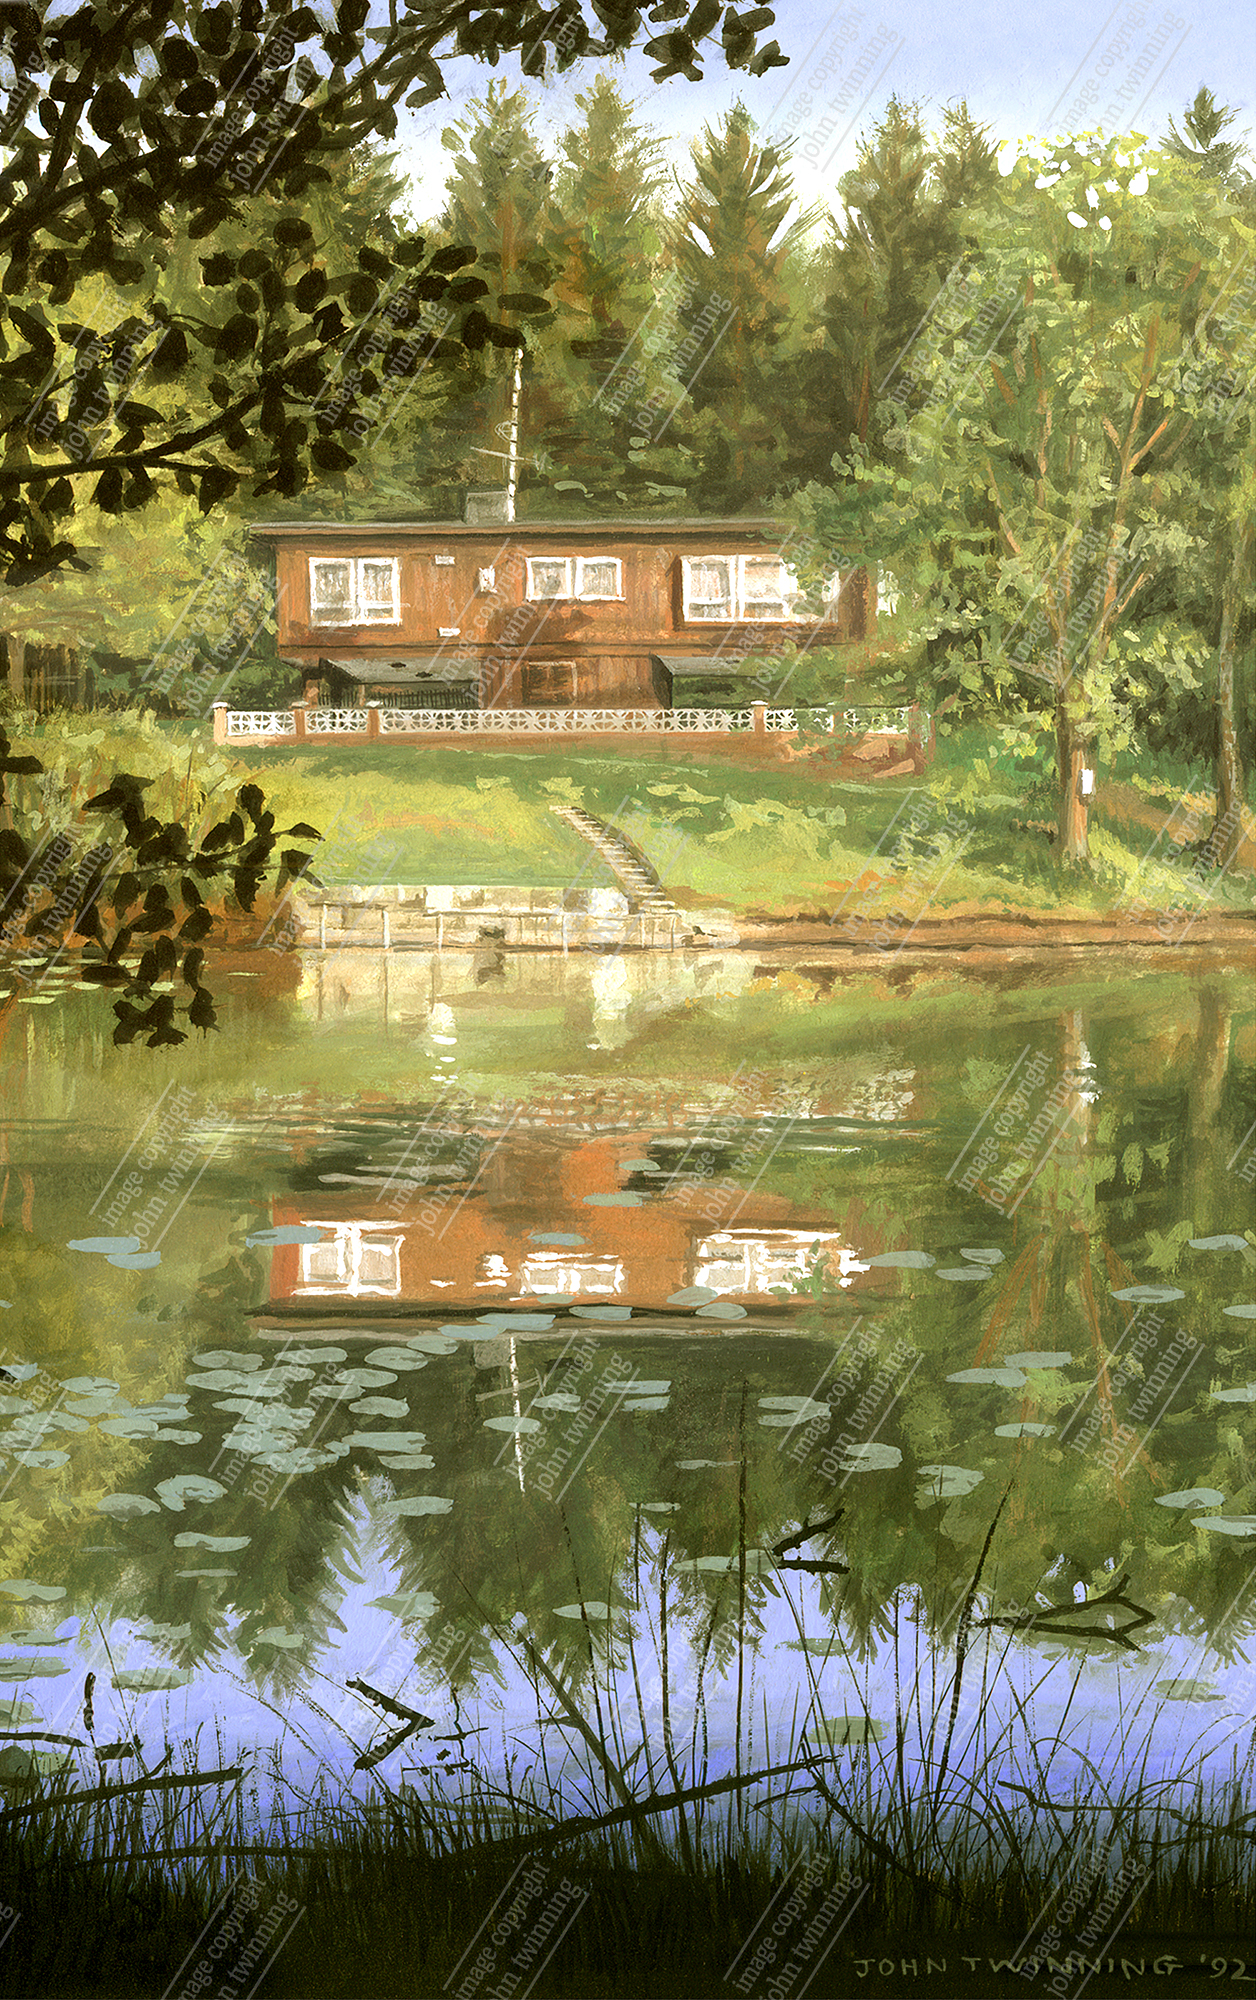 'Trout Lodge, Cannock Chase' - art print from a painting of this rural staffordshire scene reflected in a tranquil pool